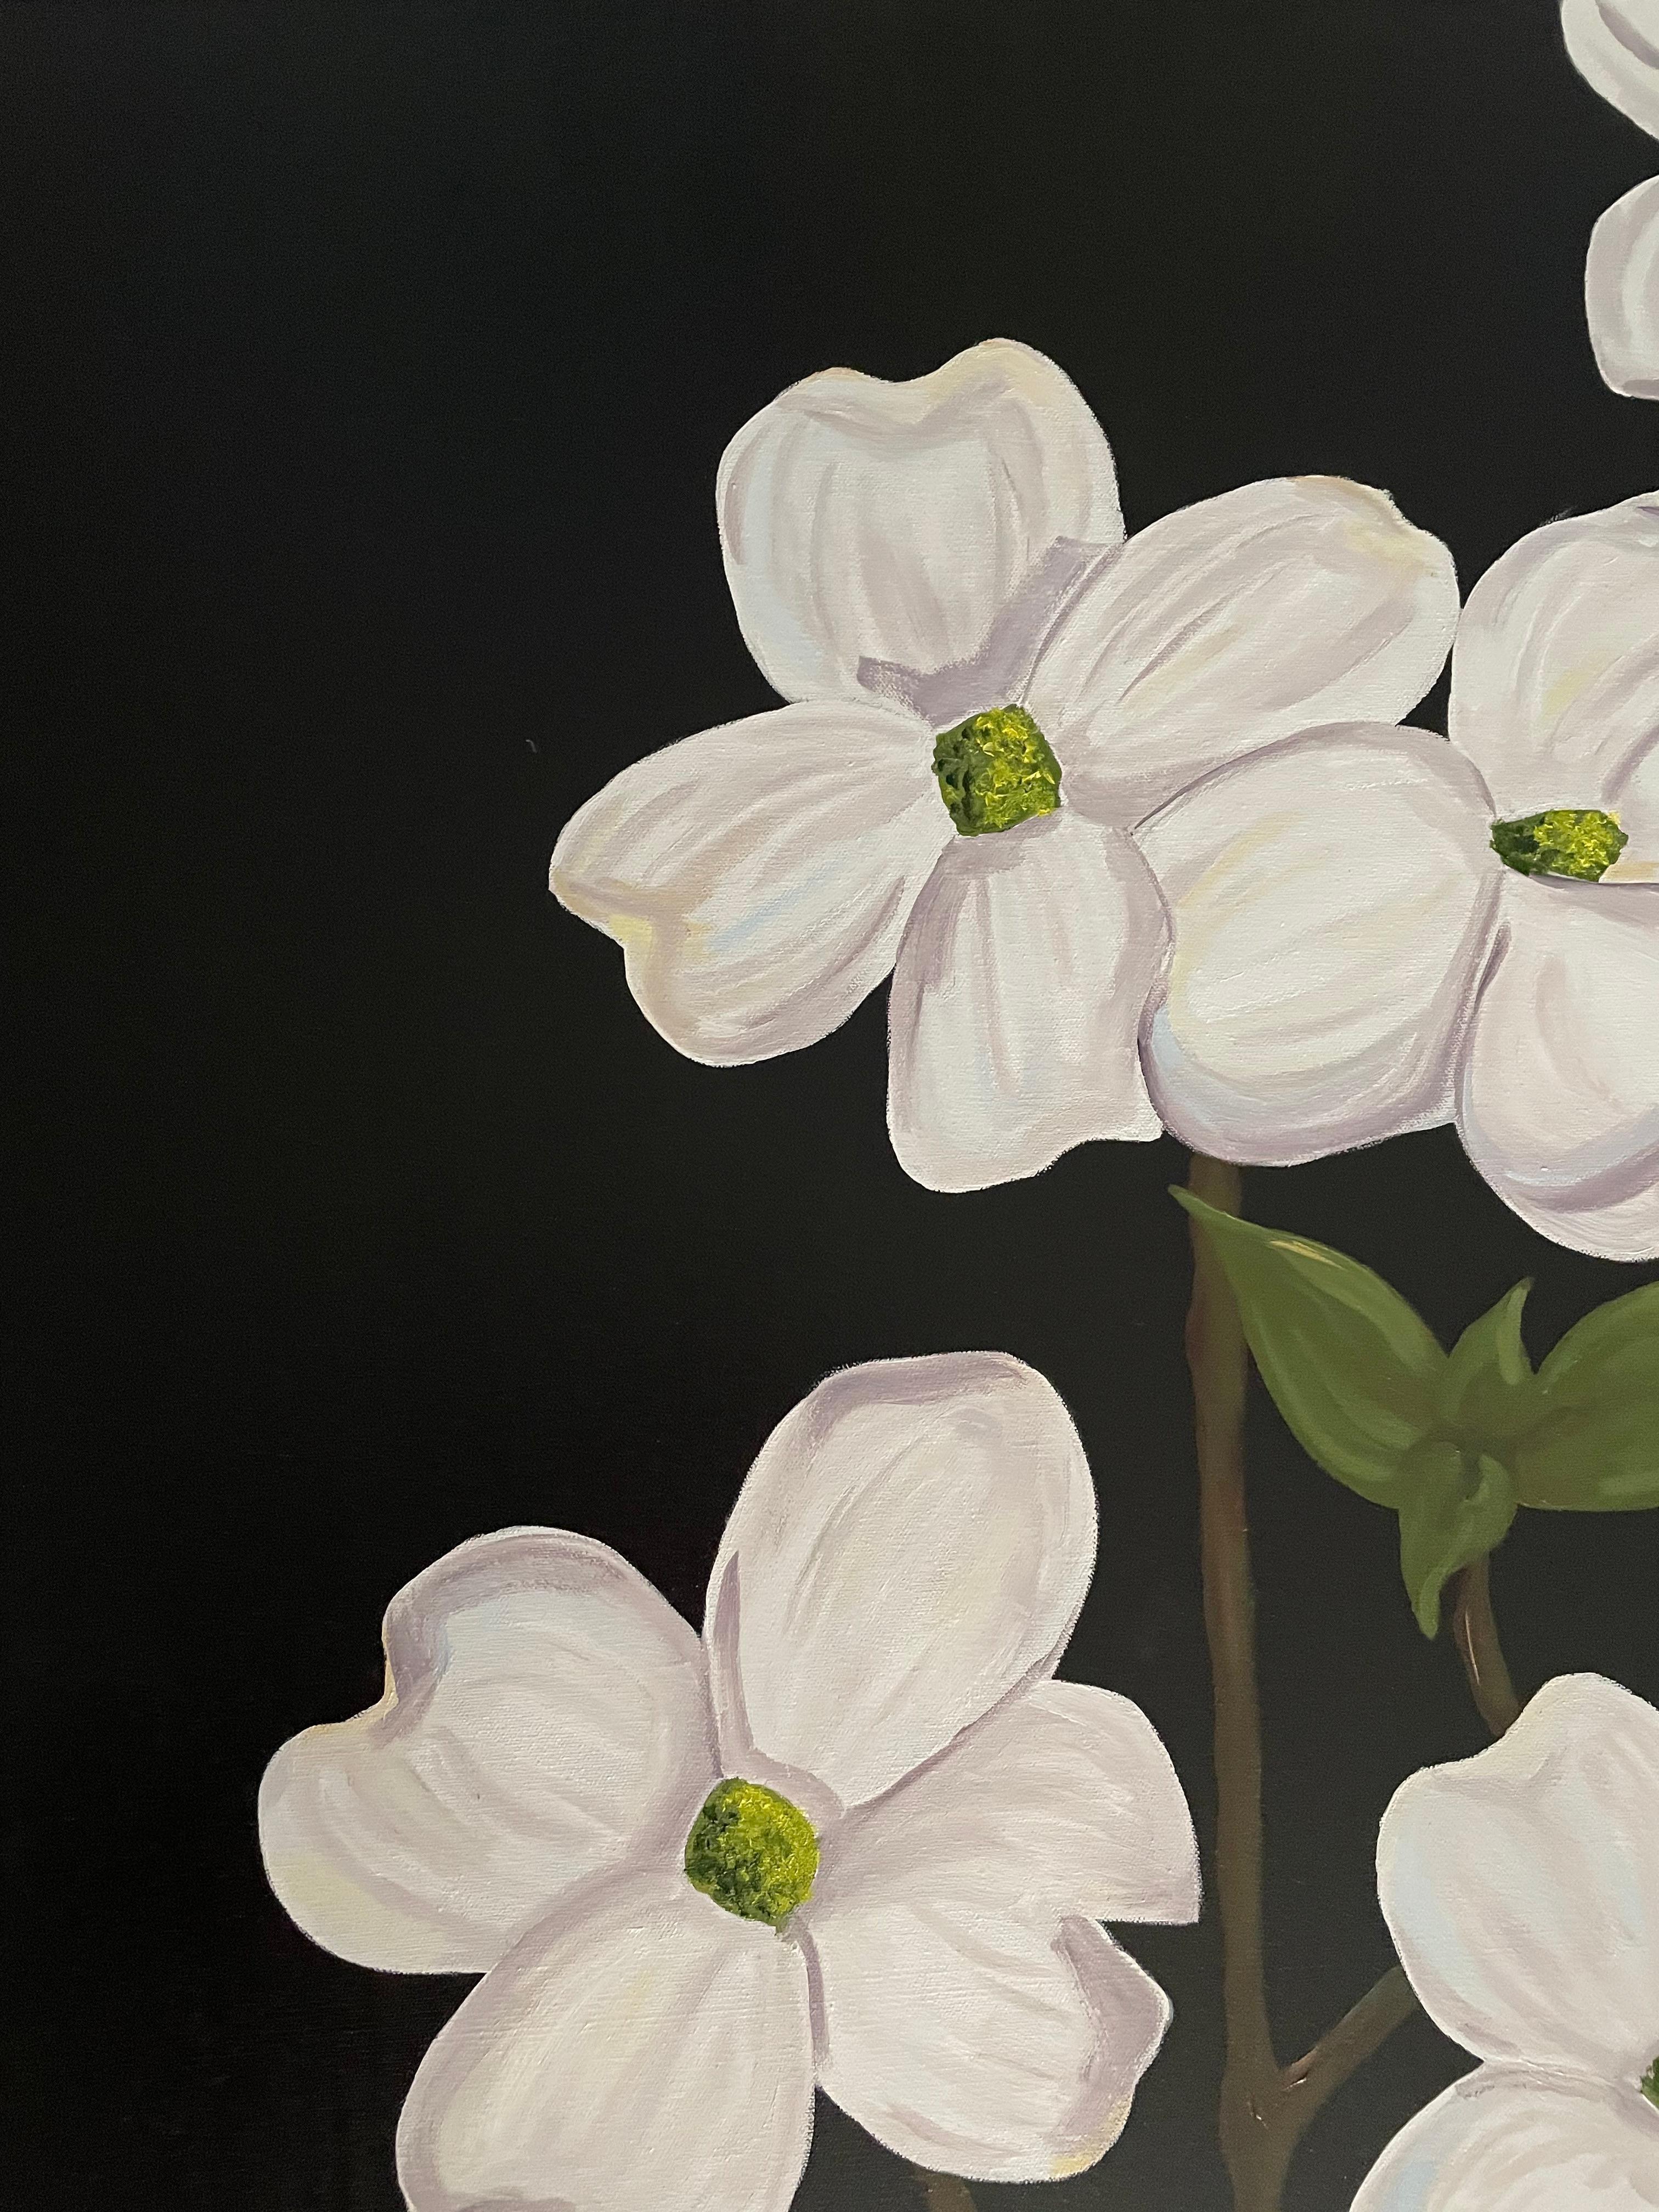 Jubilant White Flowers with Verdant Leaves on Branches. Title - Wild Dogwood - Black Still-Life Painting by Ken Miller